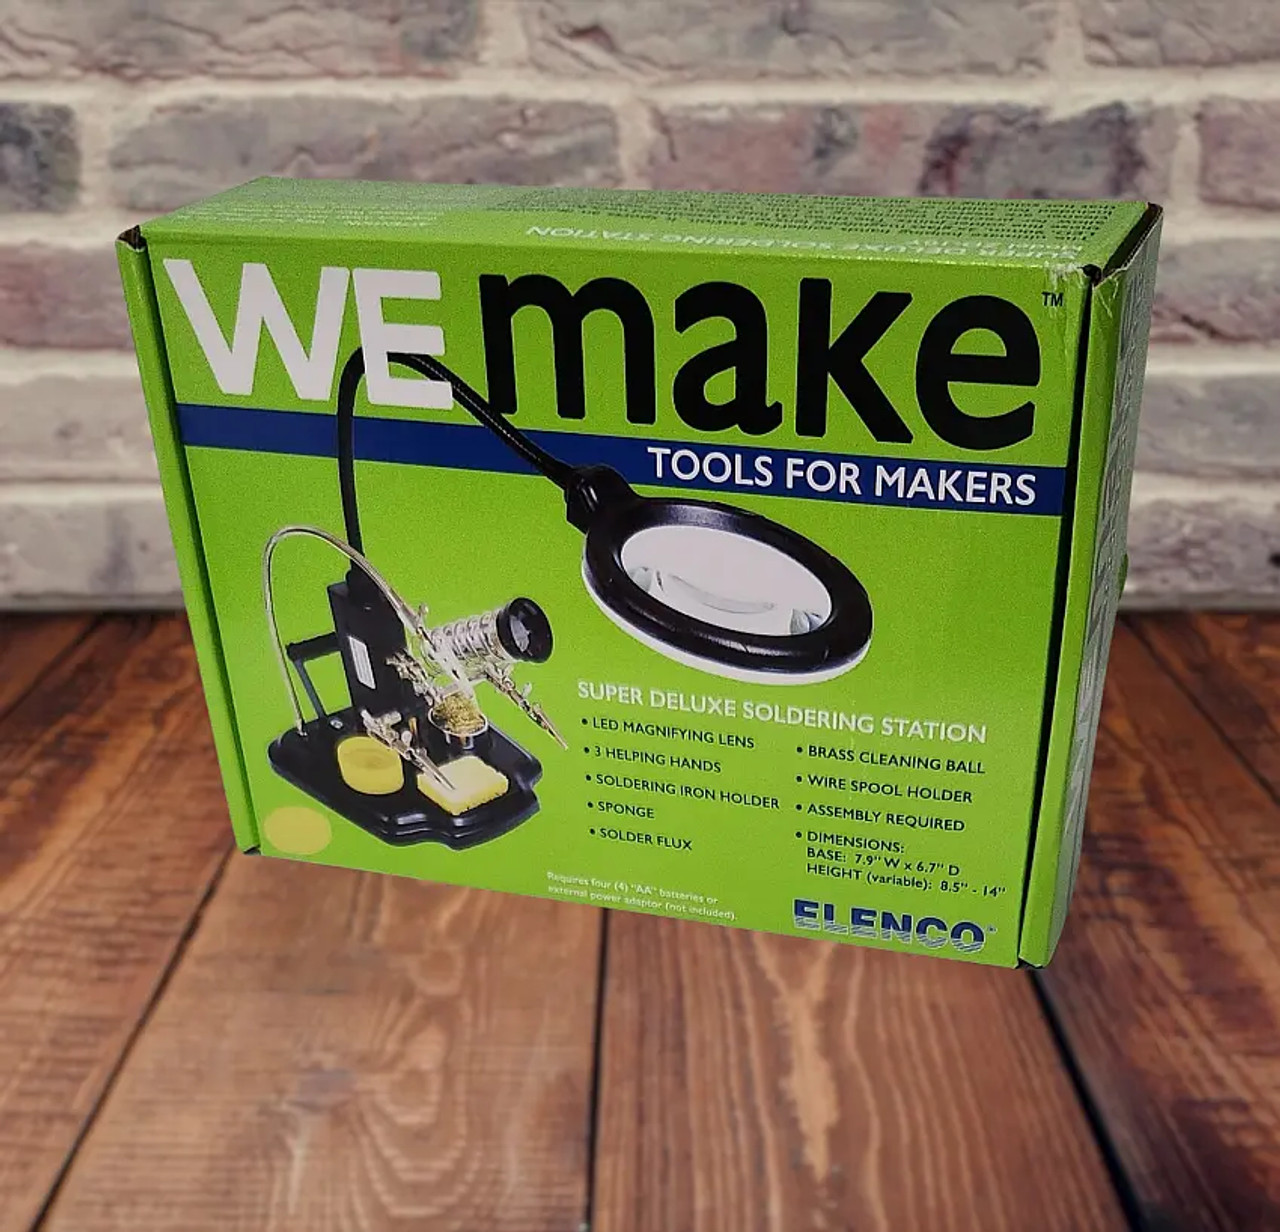 LED MAGNIFYING WORK STAND WITH THIRD HAND